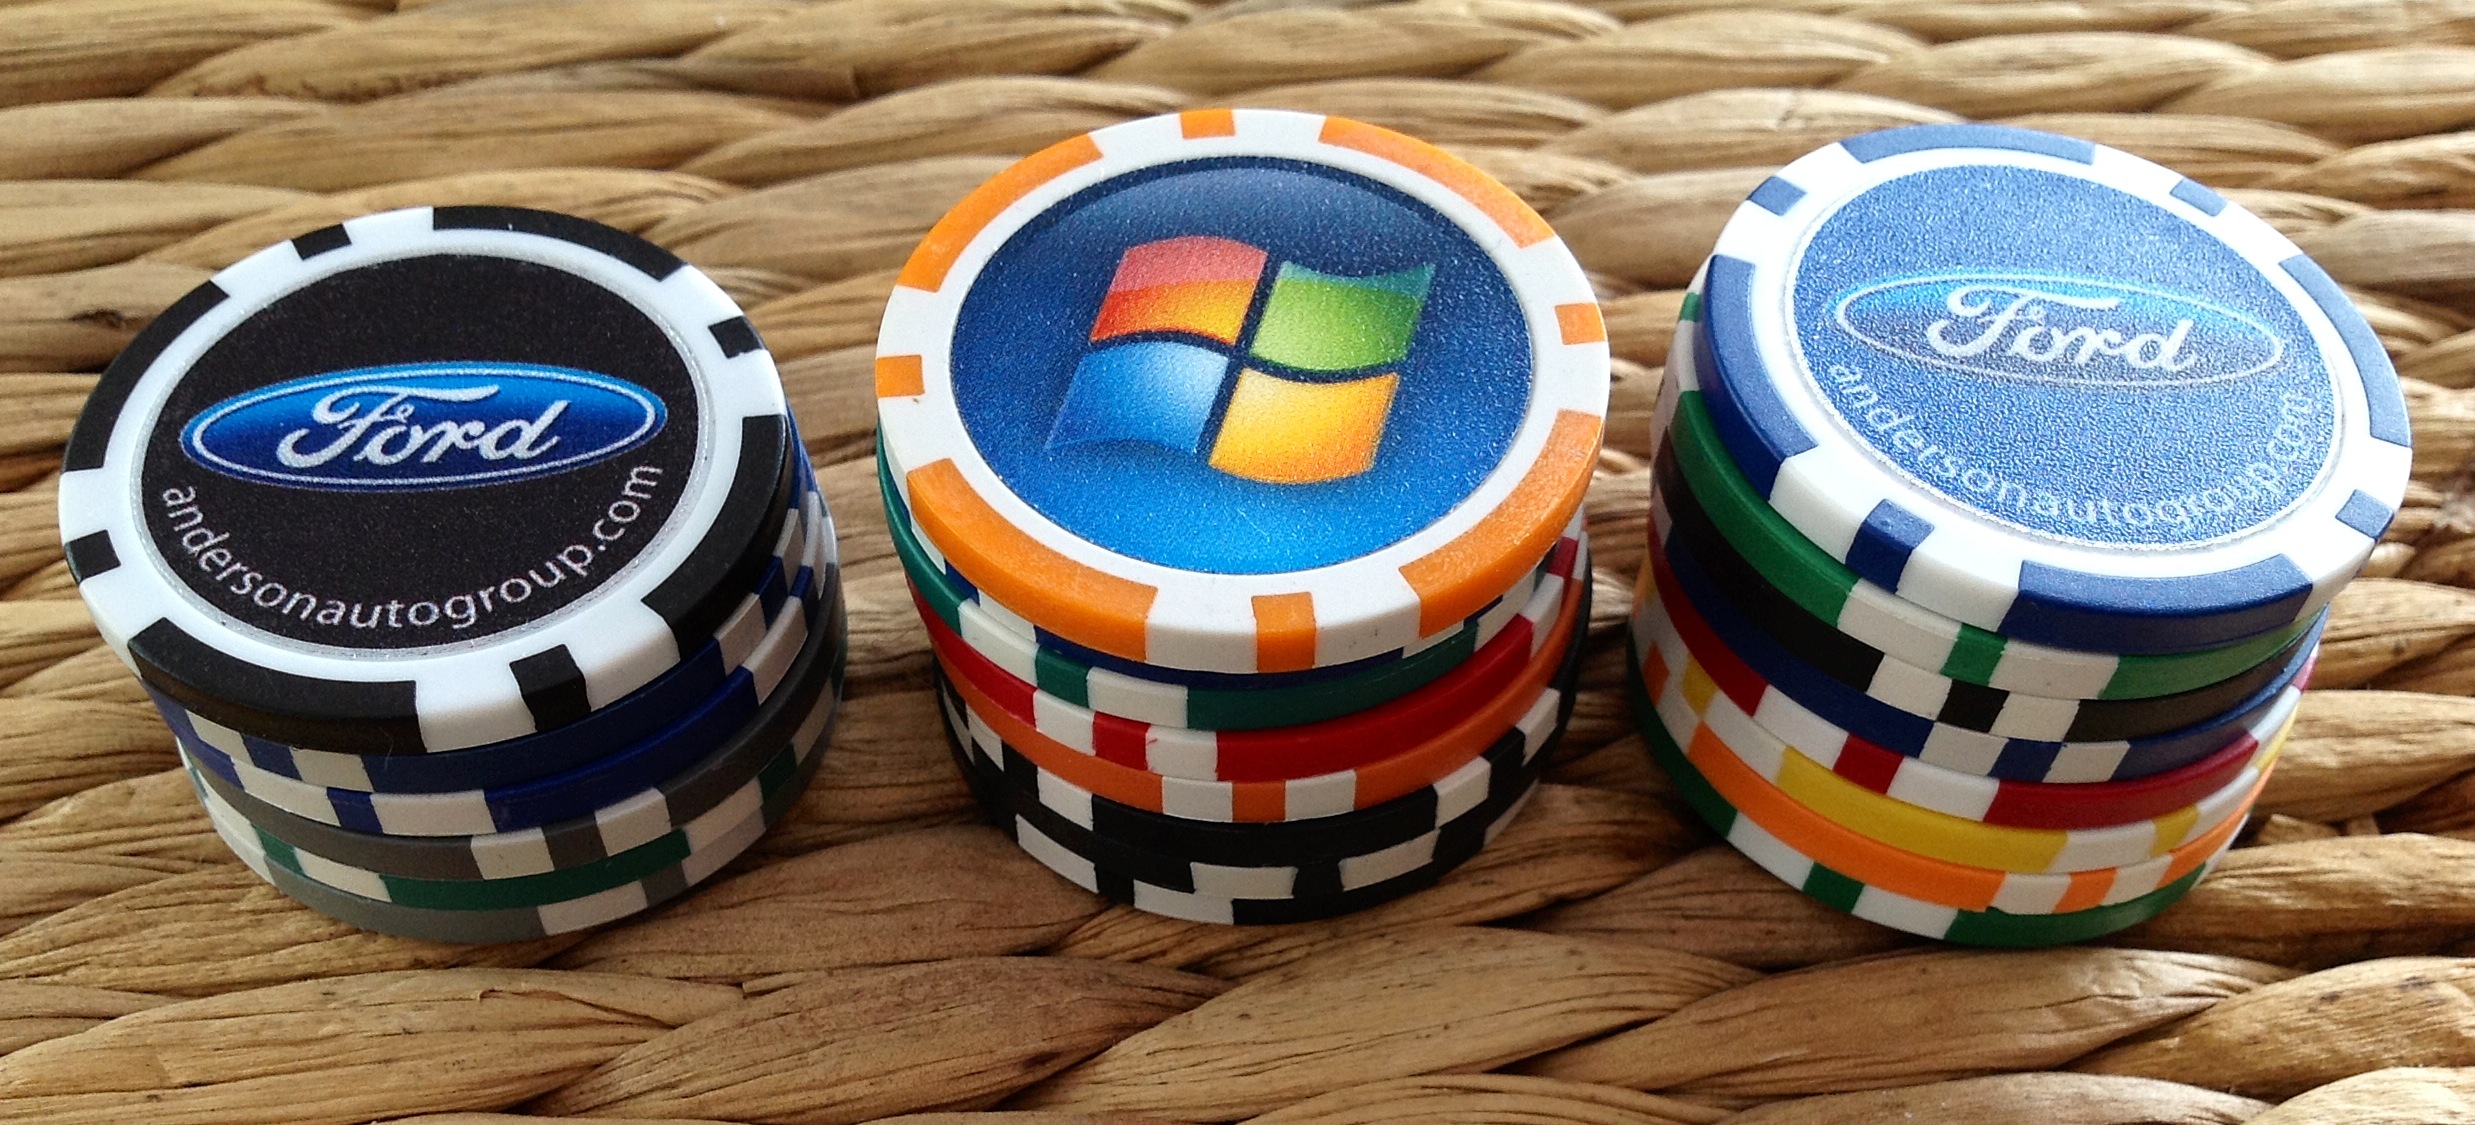 Is it legal to buy poker chips?